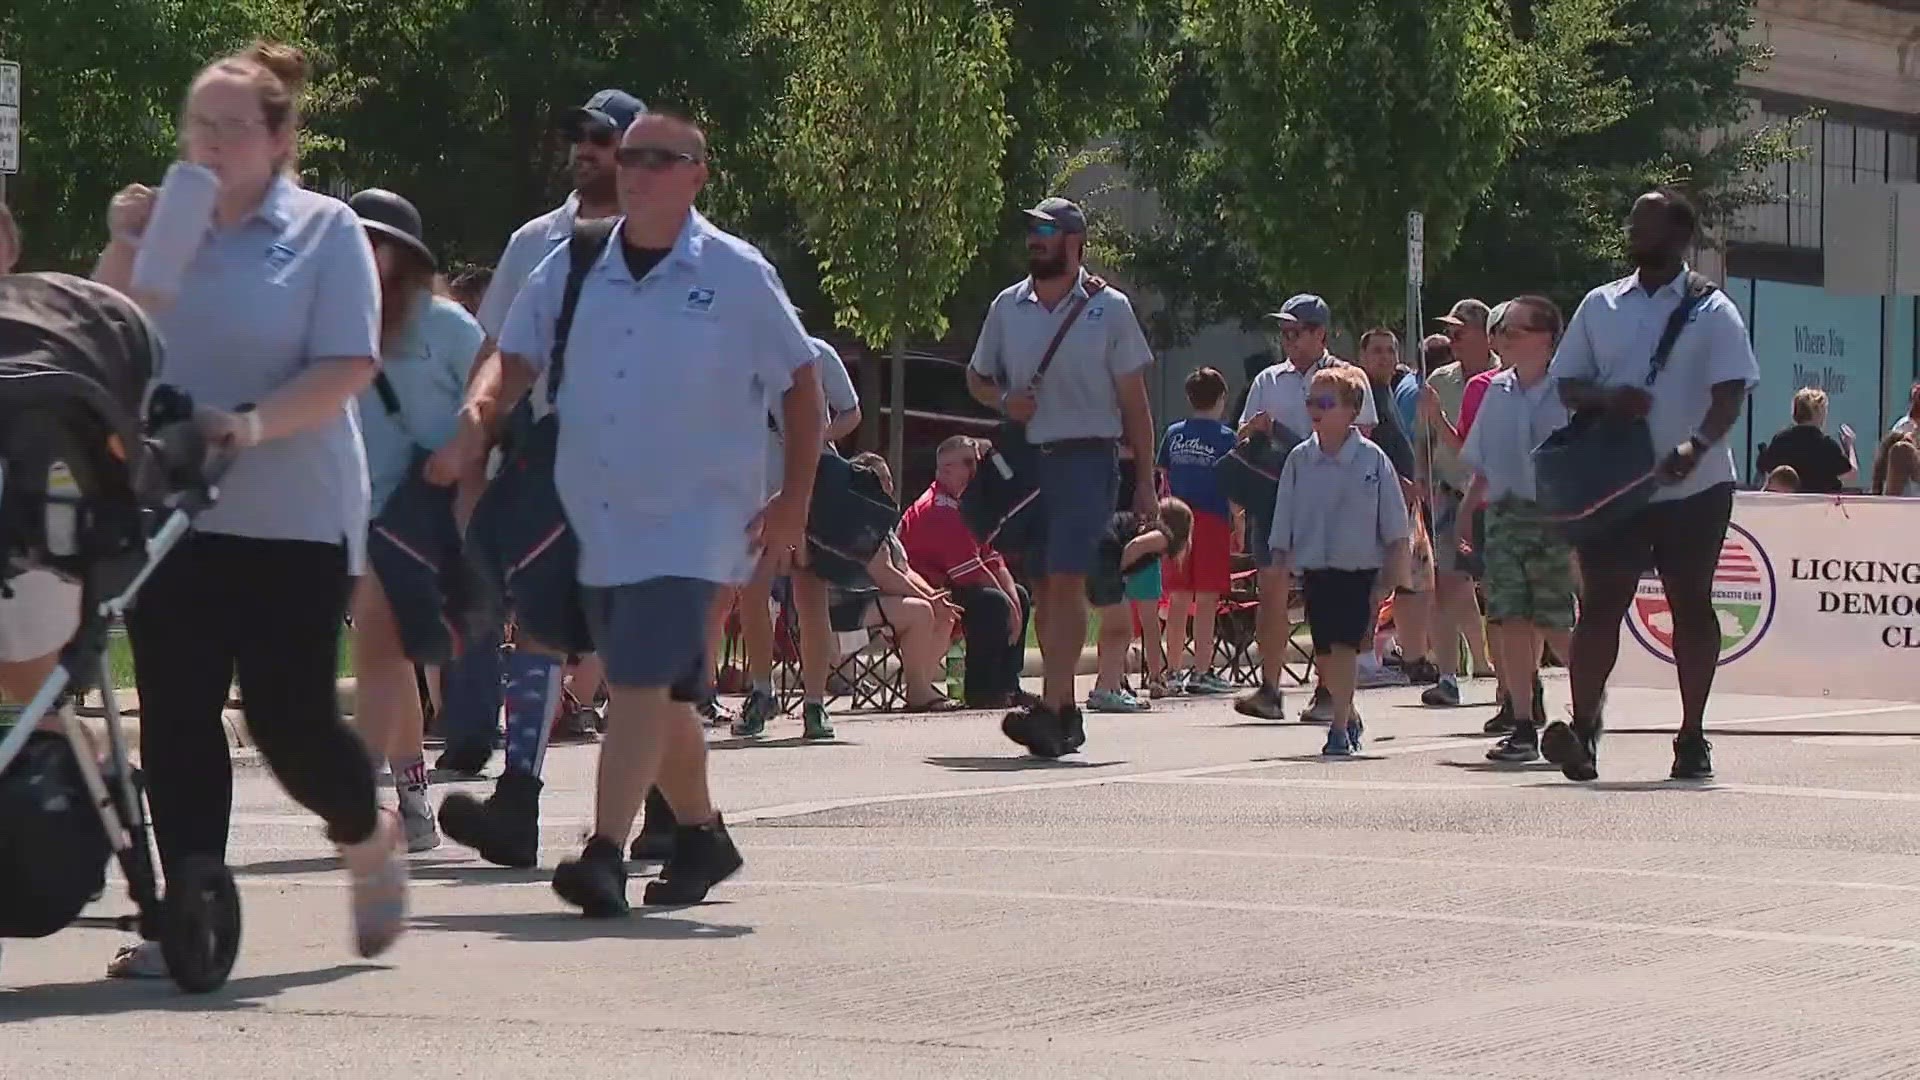 While many people use the day as a final sendoff to the summer season with BBQs and parades, union leaders use the day to celebrate the progress made.